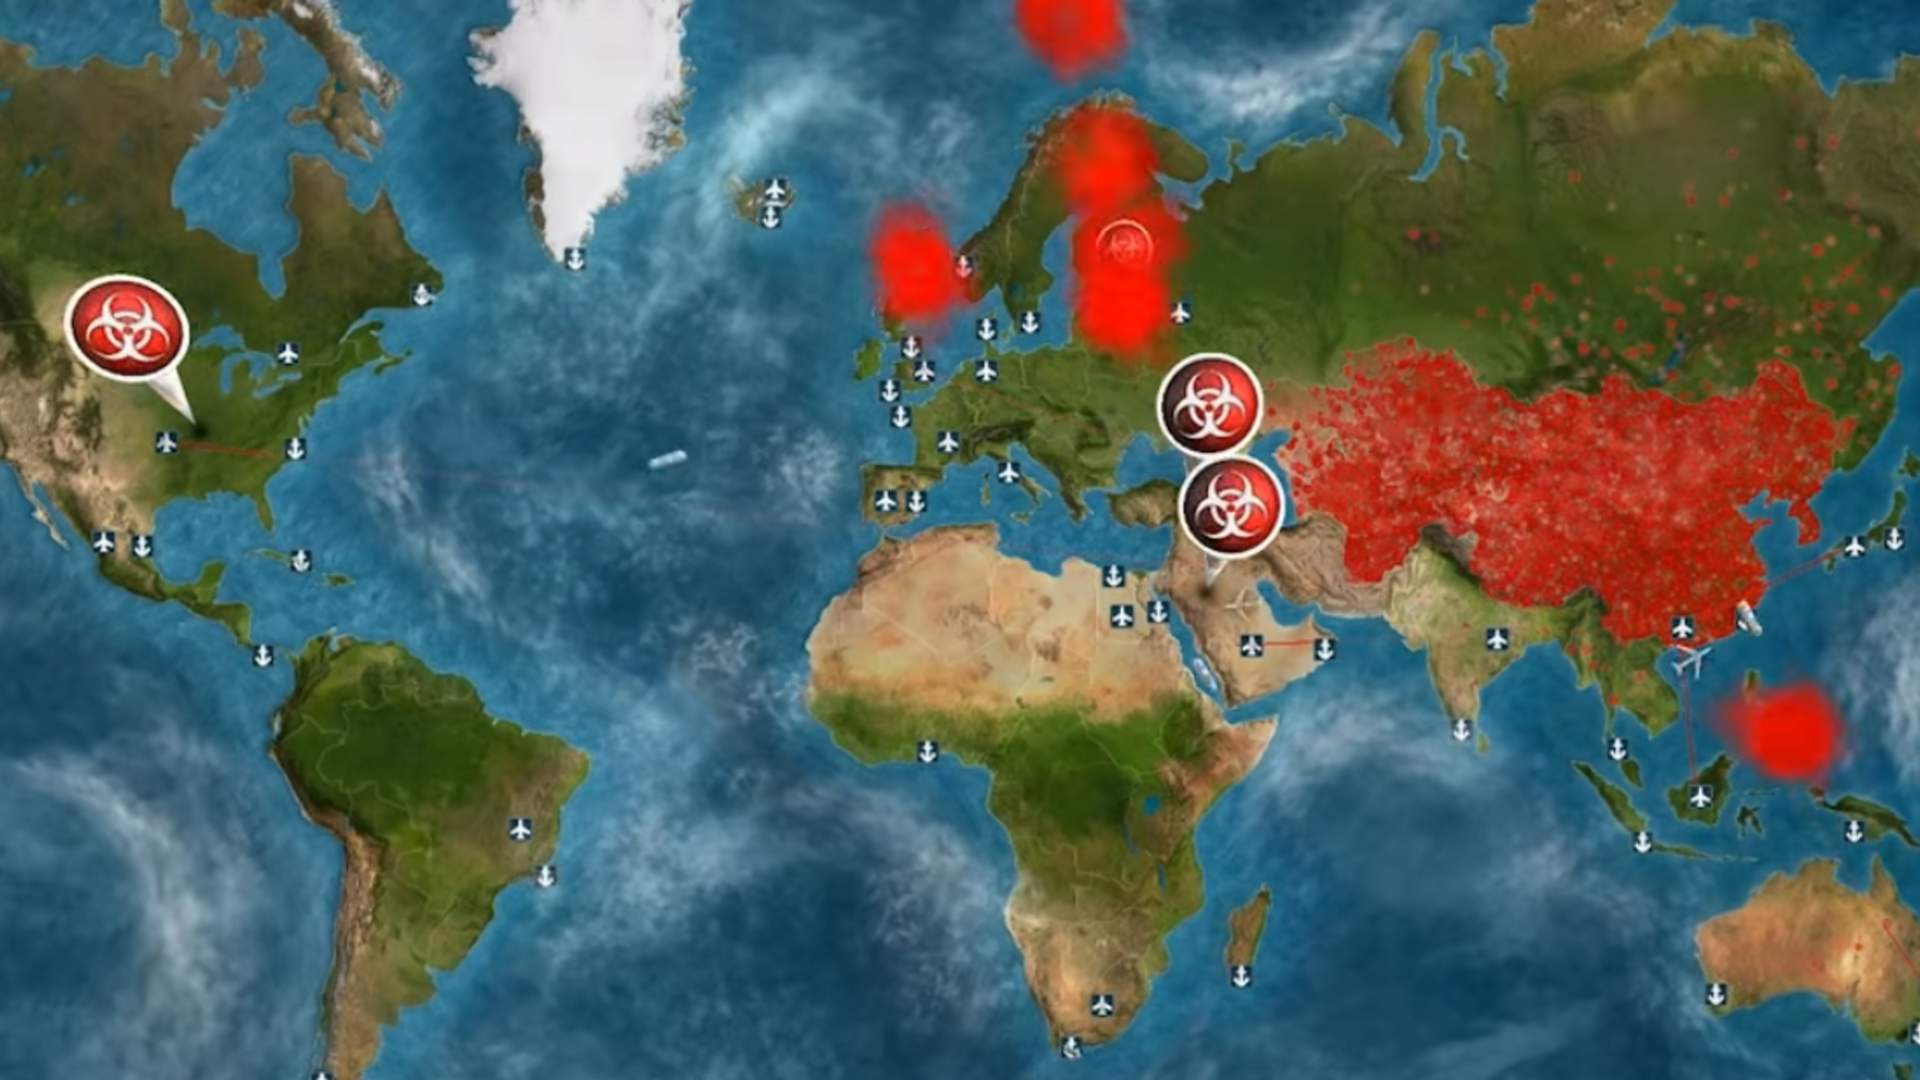 plague-inc-banned-in-china-for-including-illegal-content